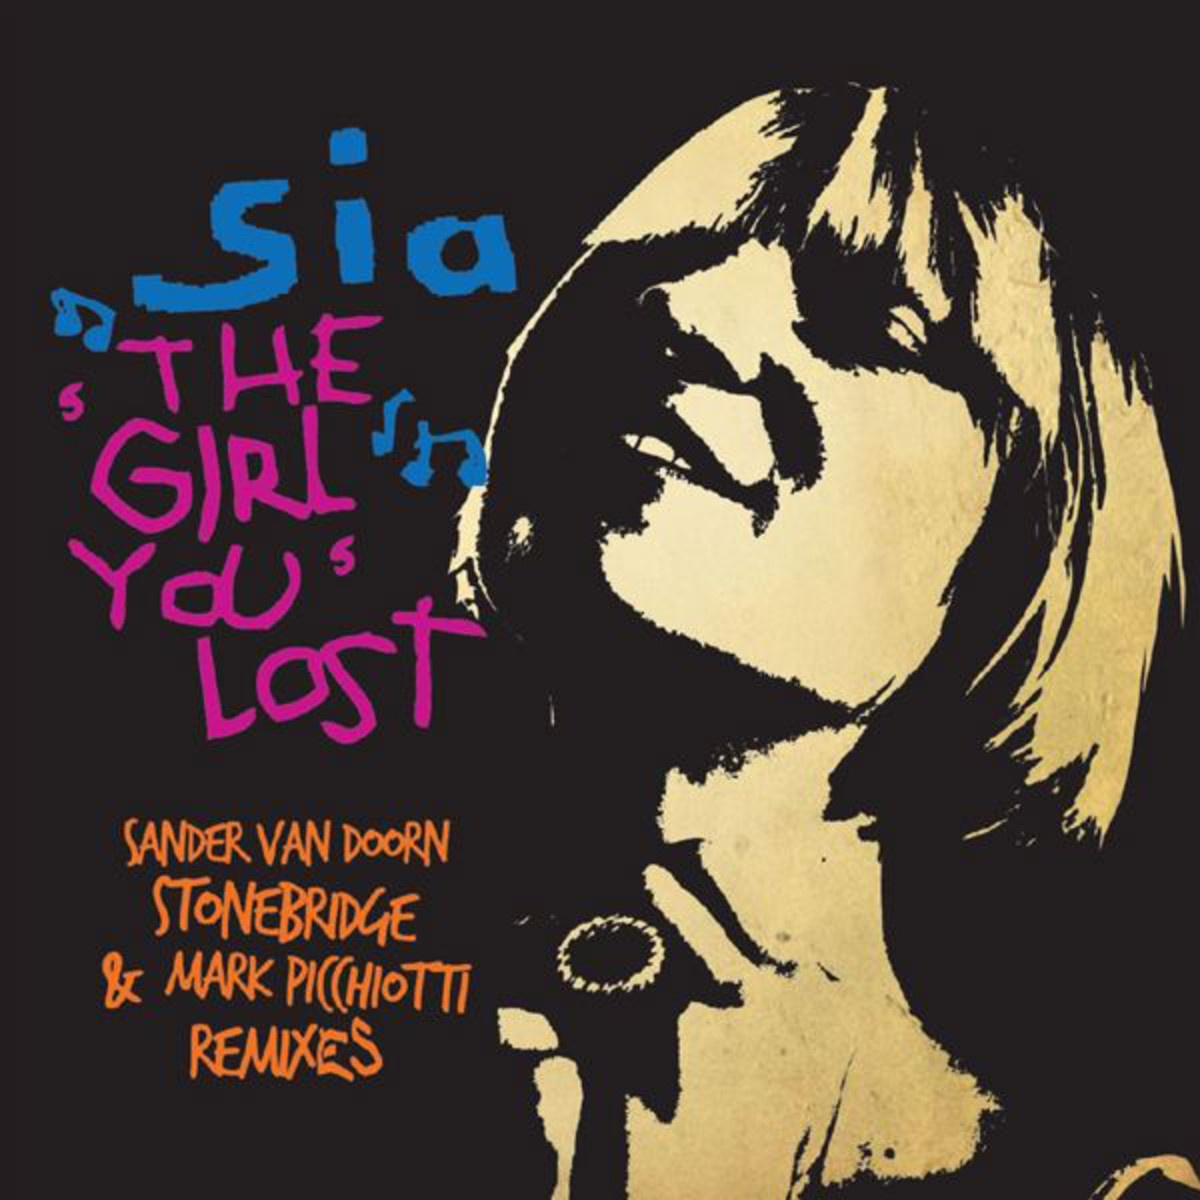 The Girl You Lost - Stongbridge Vocal Edit